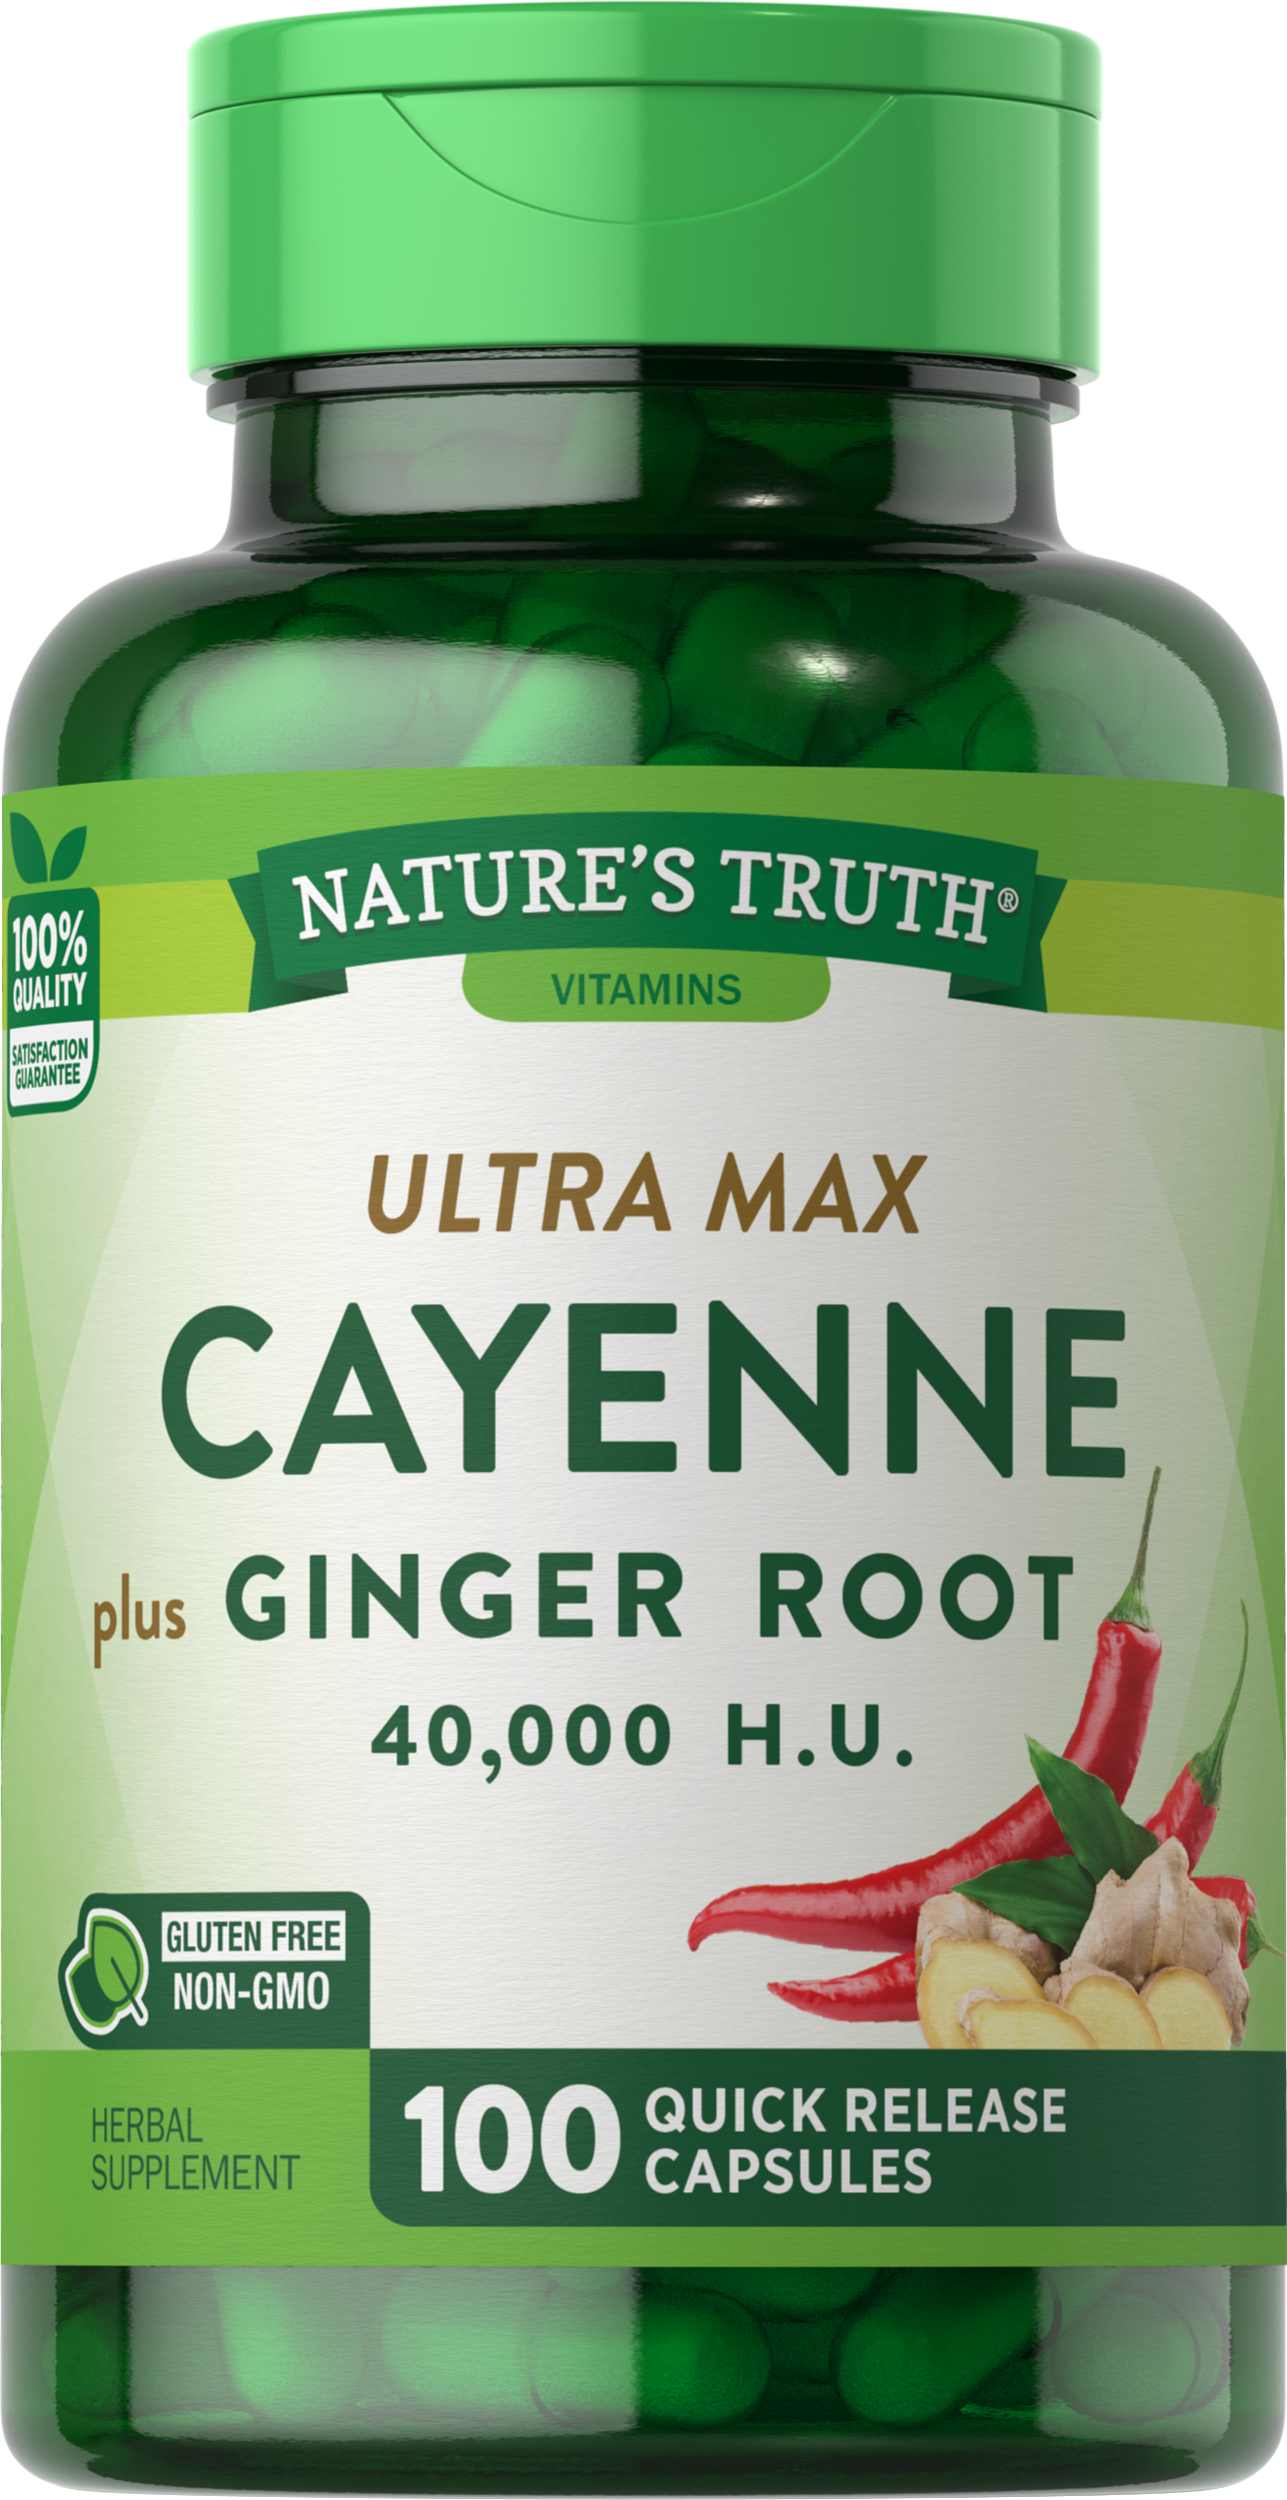 Cayenne Pepper 40,000 HU with Ginger Root